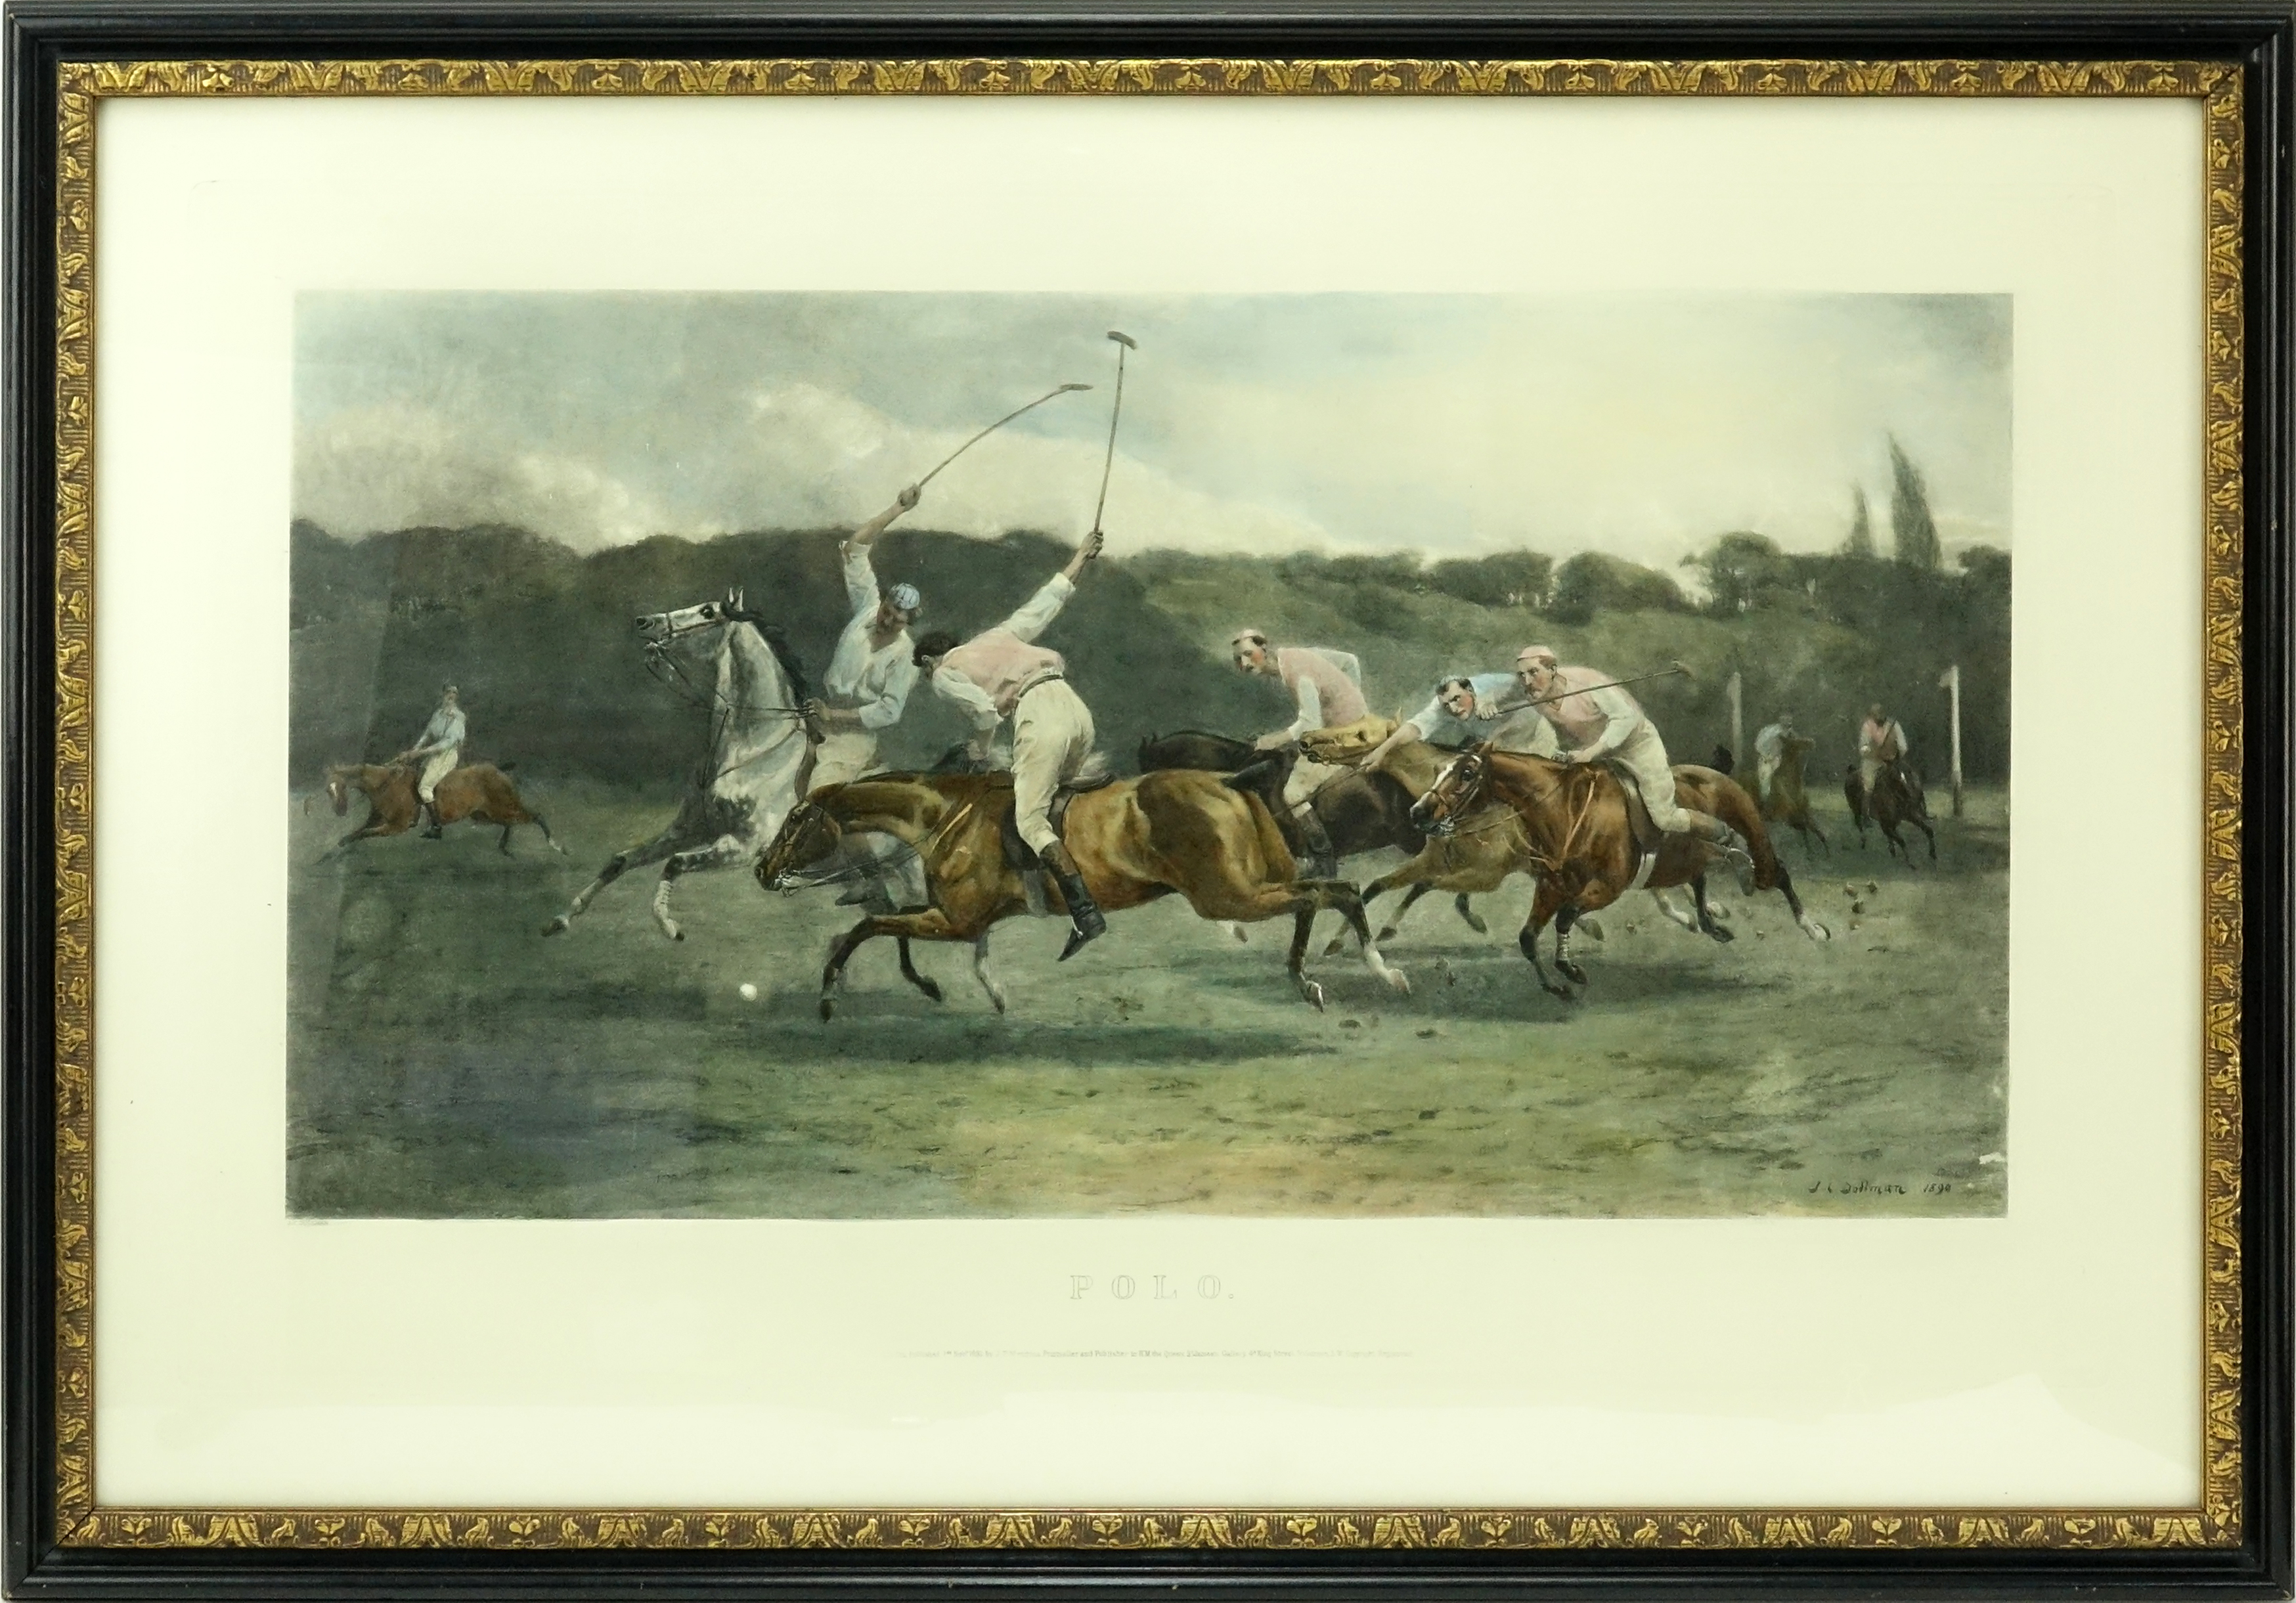 J.C. Dollman, British (1851-1934) "Polo" Color Engraving on Paper.